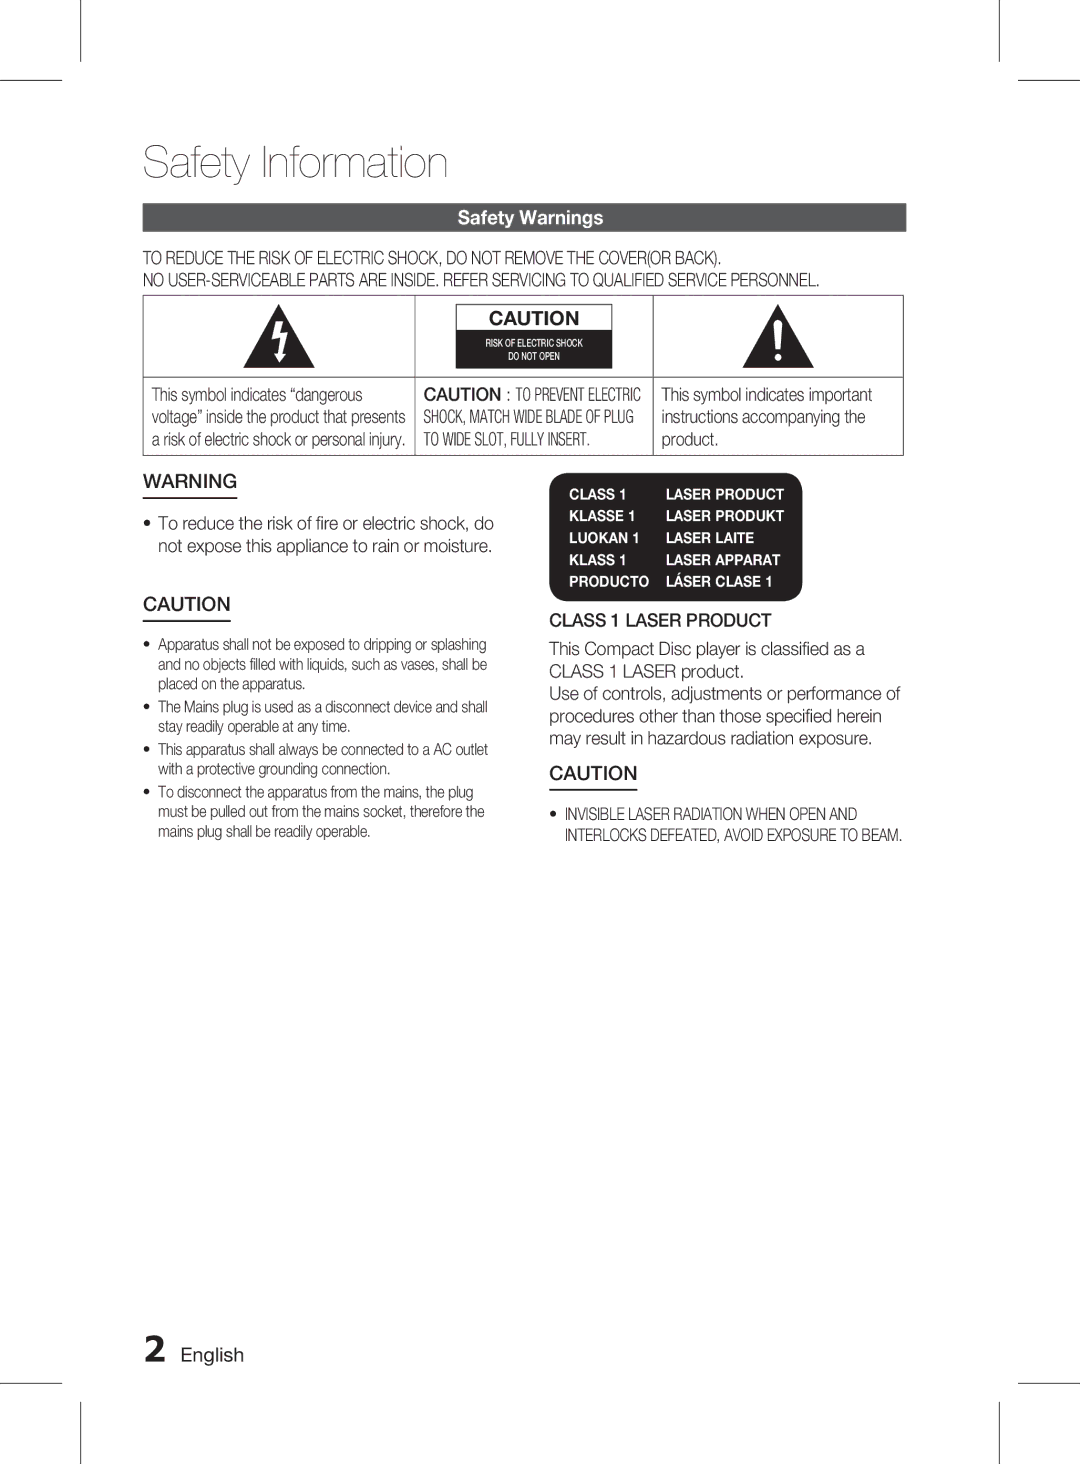 Samsung HT-D6750WK/SQ manual Safety Information, Safety Warnings,  English, Class 1 Laser Product 